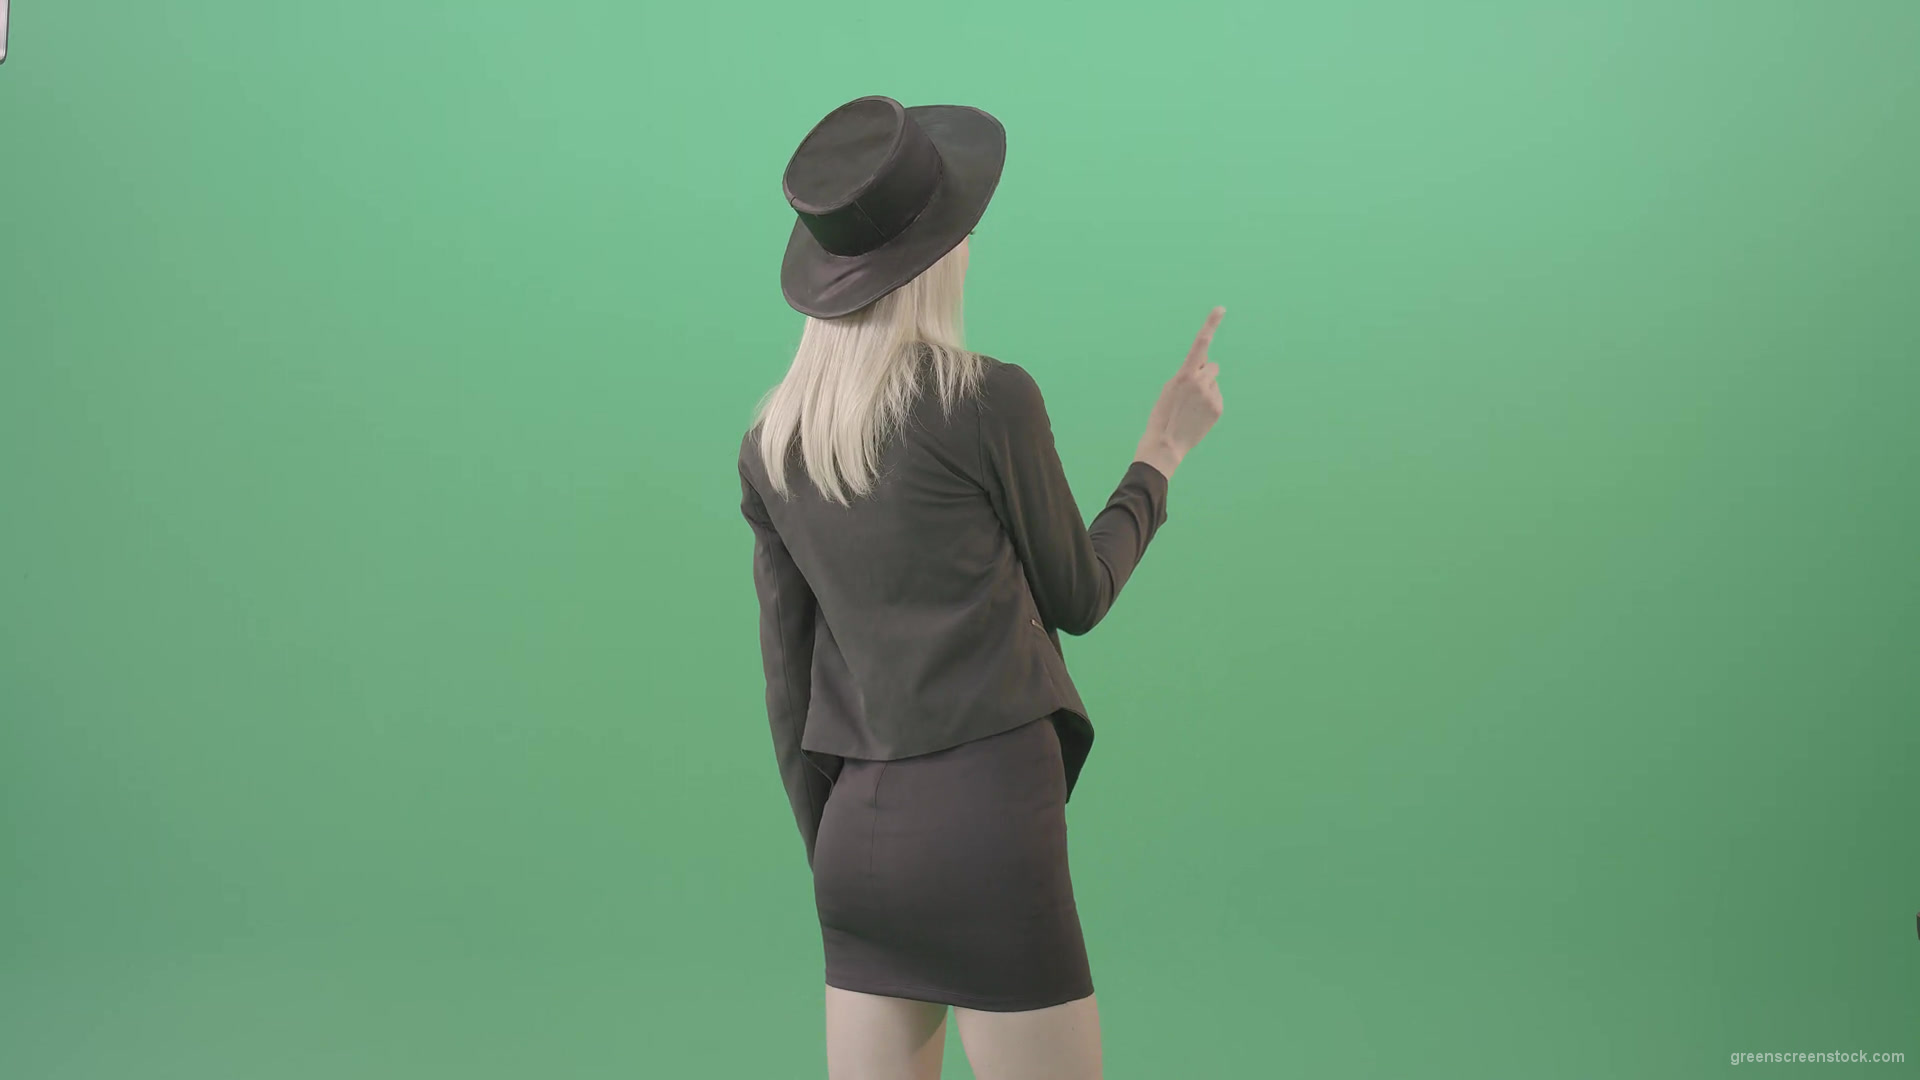 Blonde-Girl-looking-digital-virtual-products-on-touch-screen-from-back-side-4K-Green-Screen-Video-Footage-1920_007 Green Screen Stock